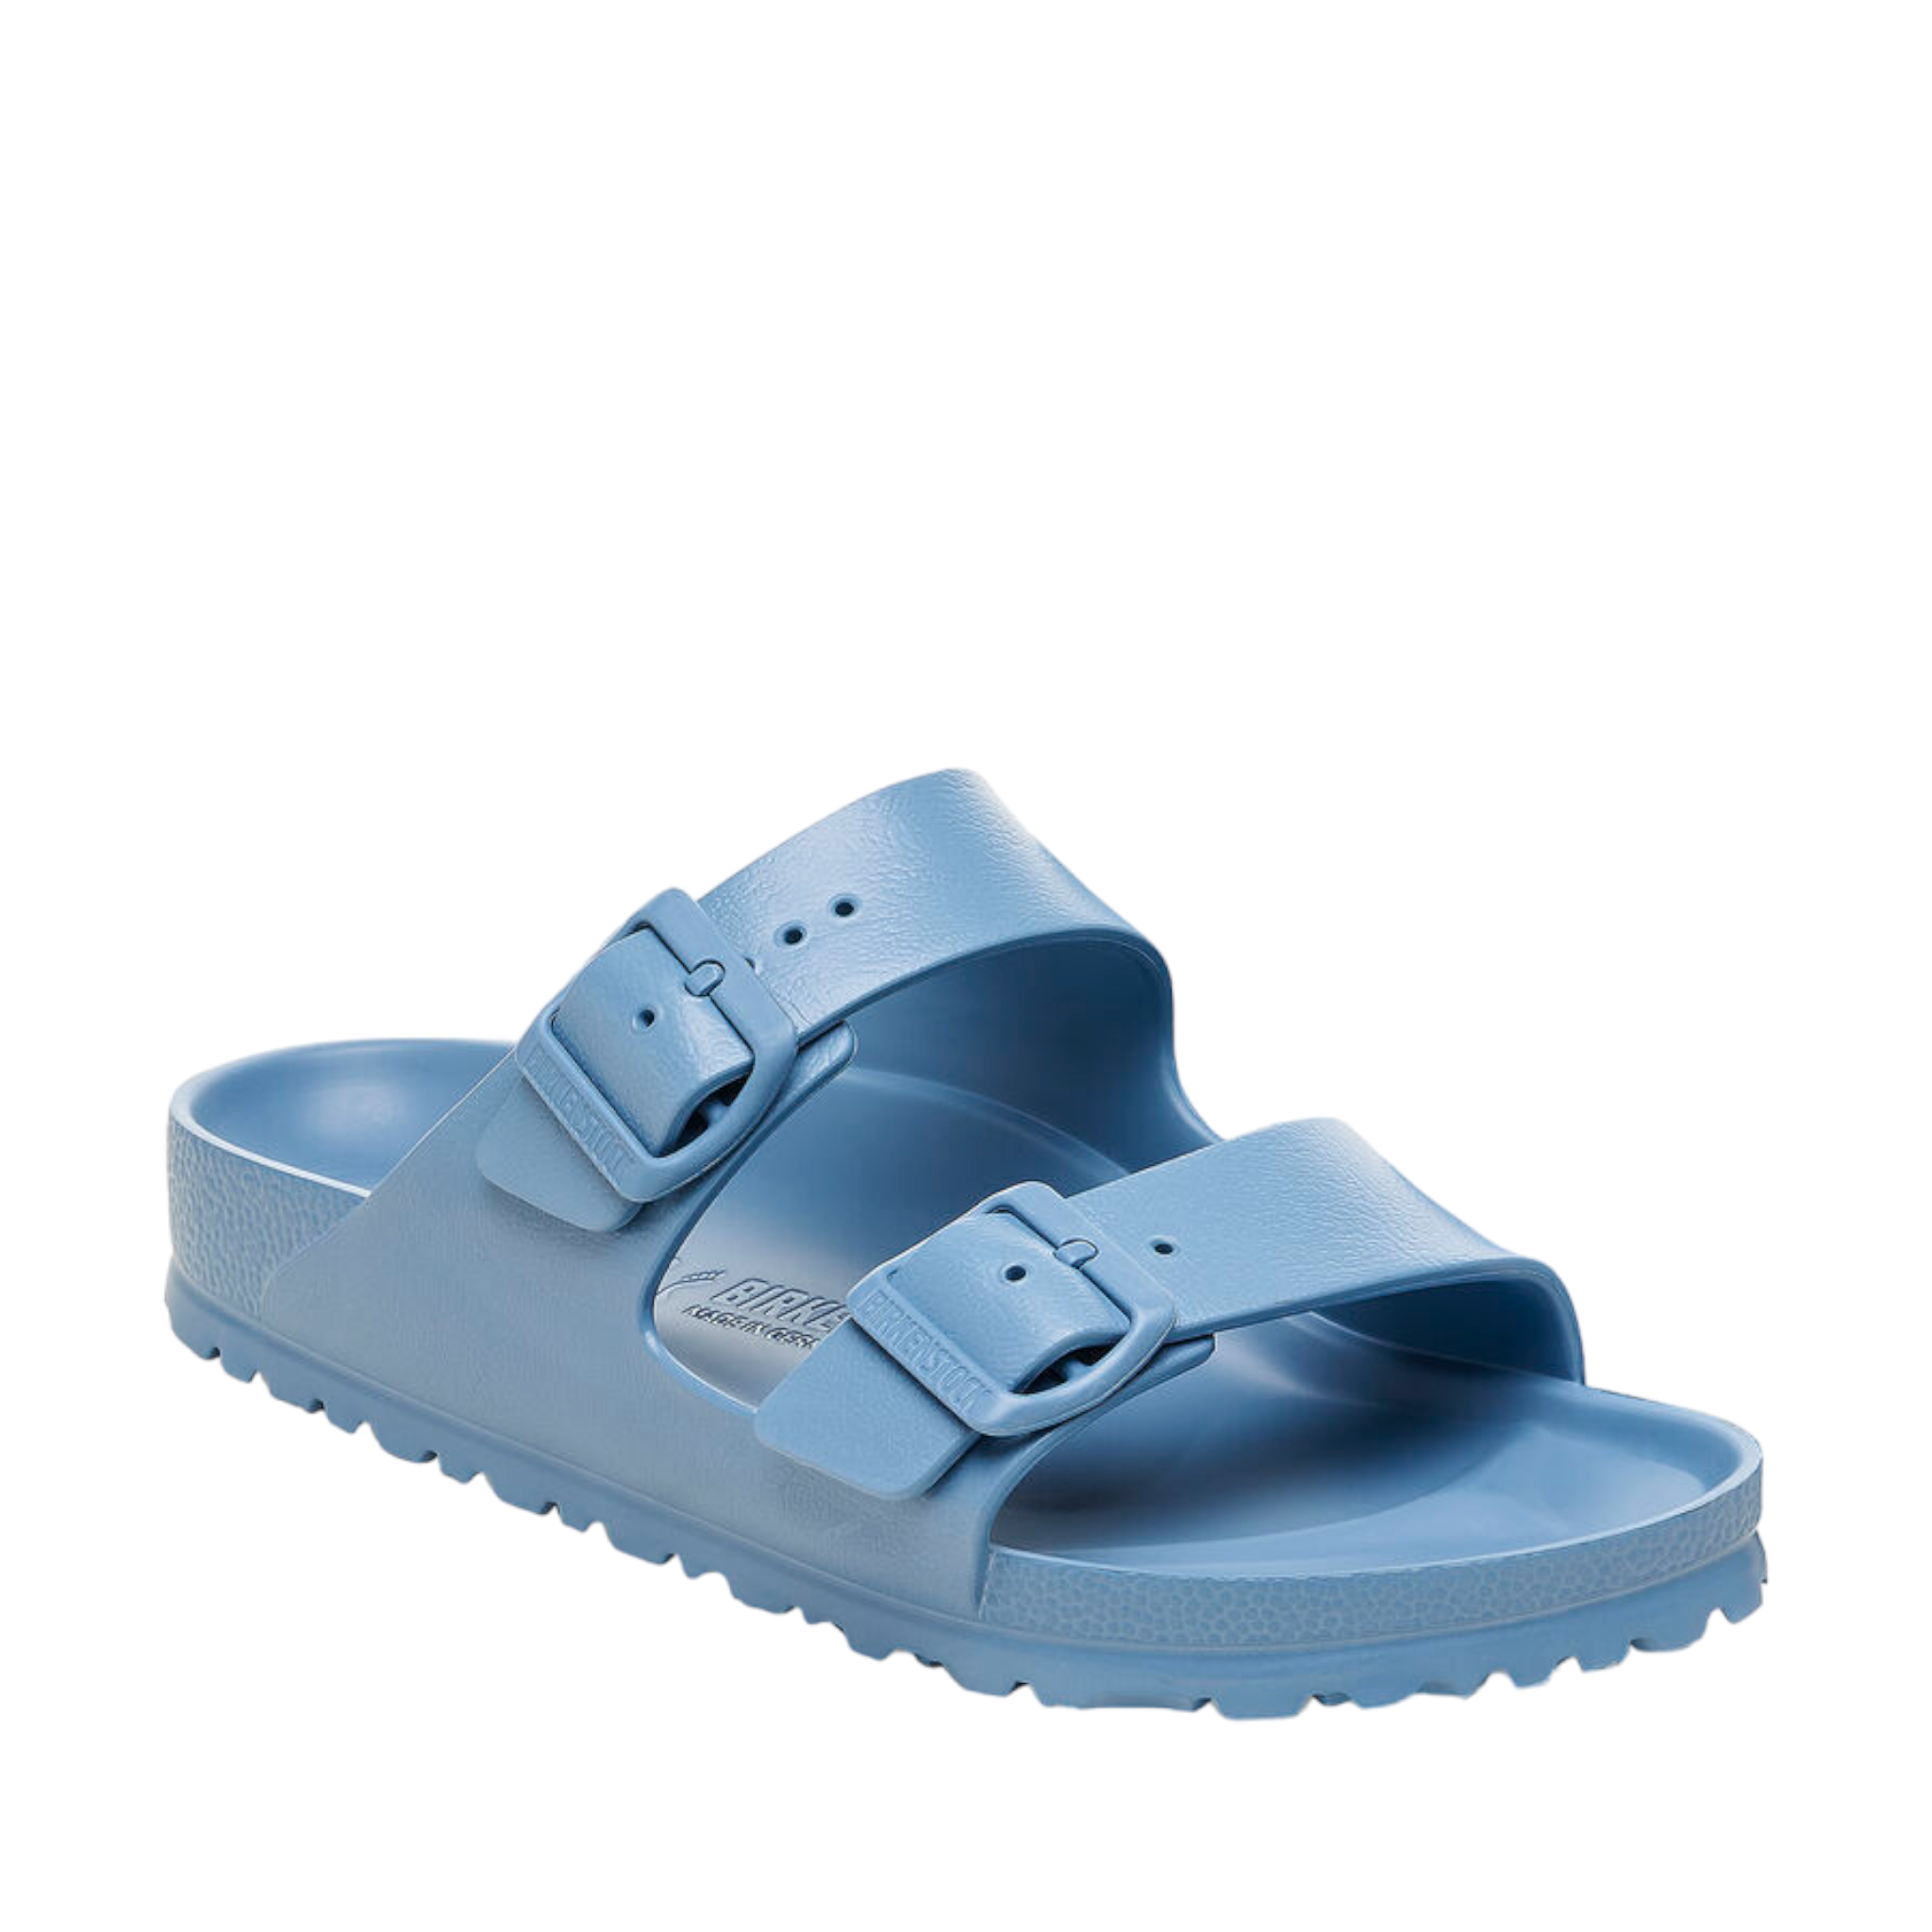 Front angle view of Elemental blue Arizona Sandal from Birkenstock. Two buckles straps over the top of the foot. Buckle is blue. Shop Online and In-store with shoe&amp;me Mount Maunganui. 